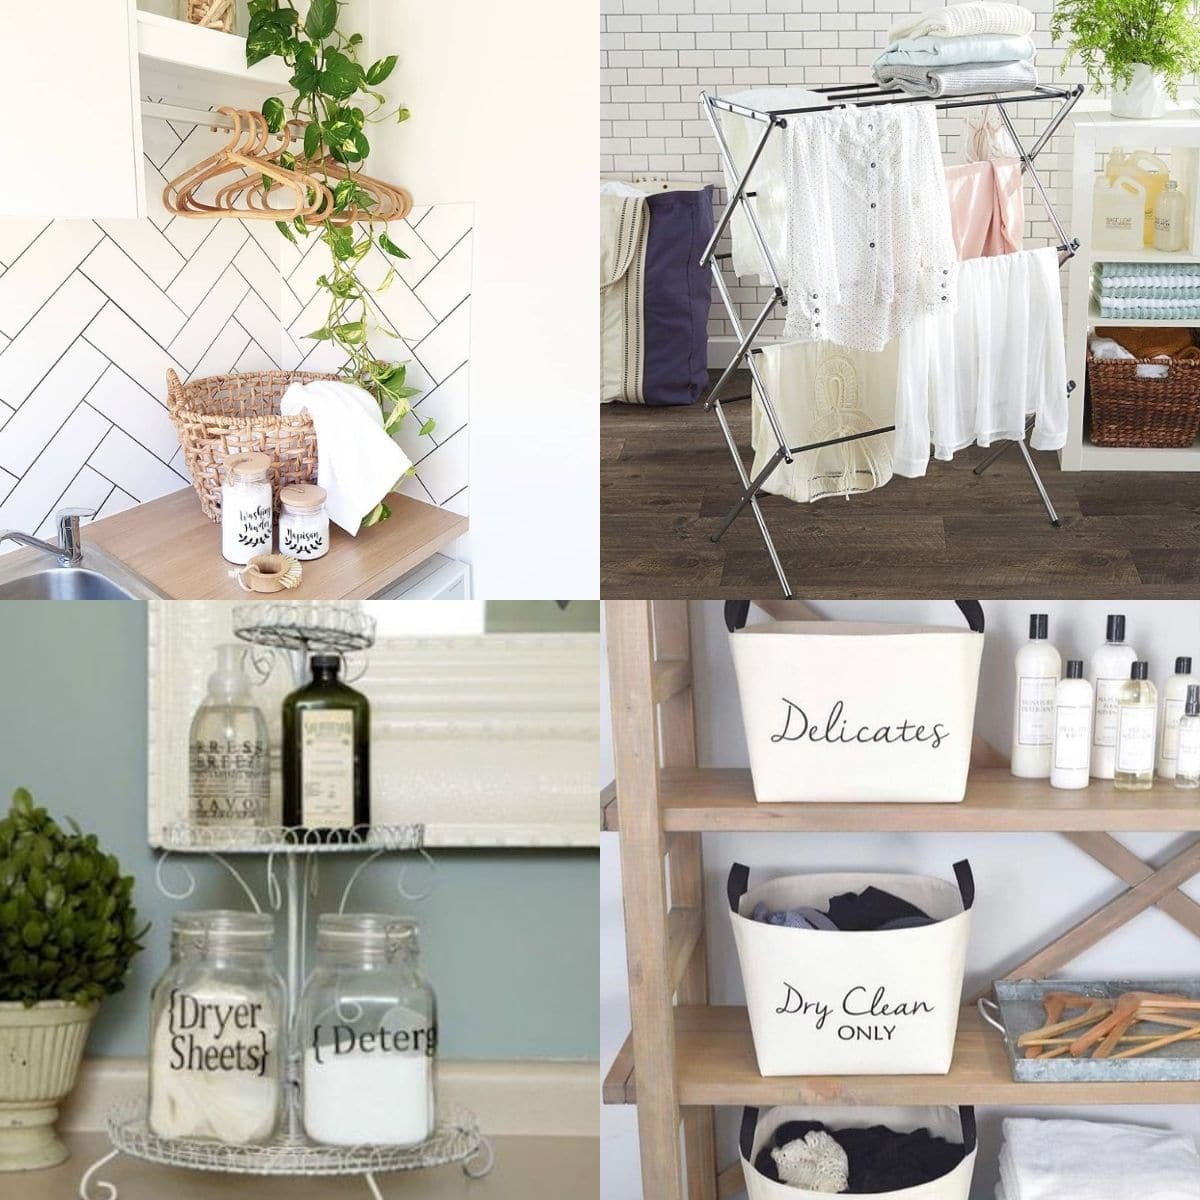 Laundry room can get messy!

Use these storage hacks to keep your laundry room neat and beautiful. 😉

#Storage #StorageIdeas #LaundryRoomStorage #LaundryRoomStorageIdeas

 LocalInfoForYou.com/246918/laundry…